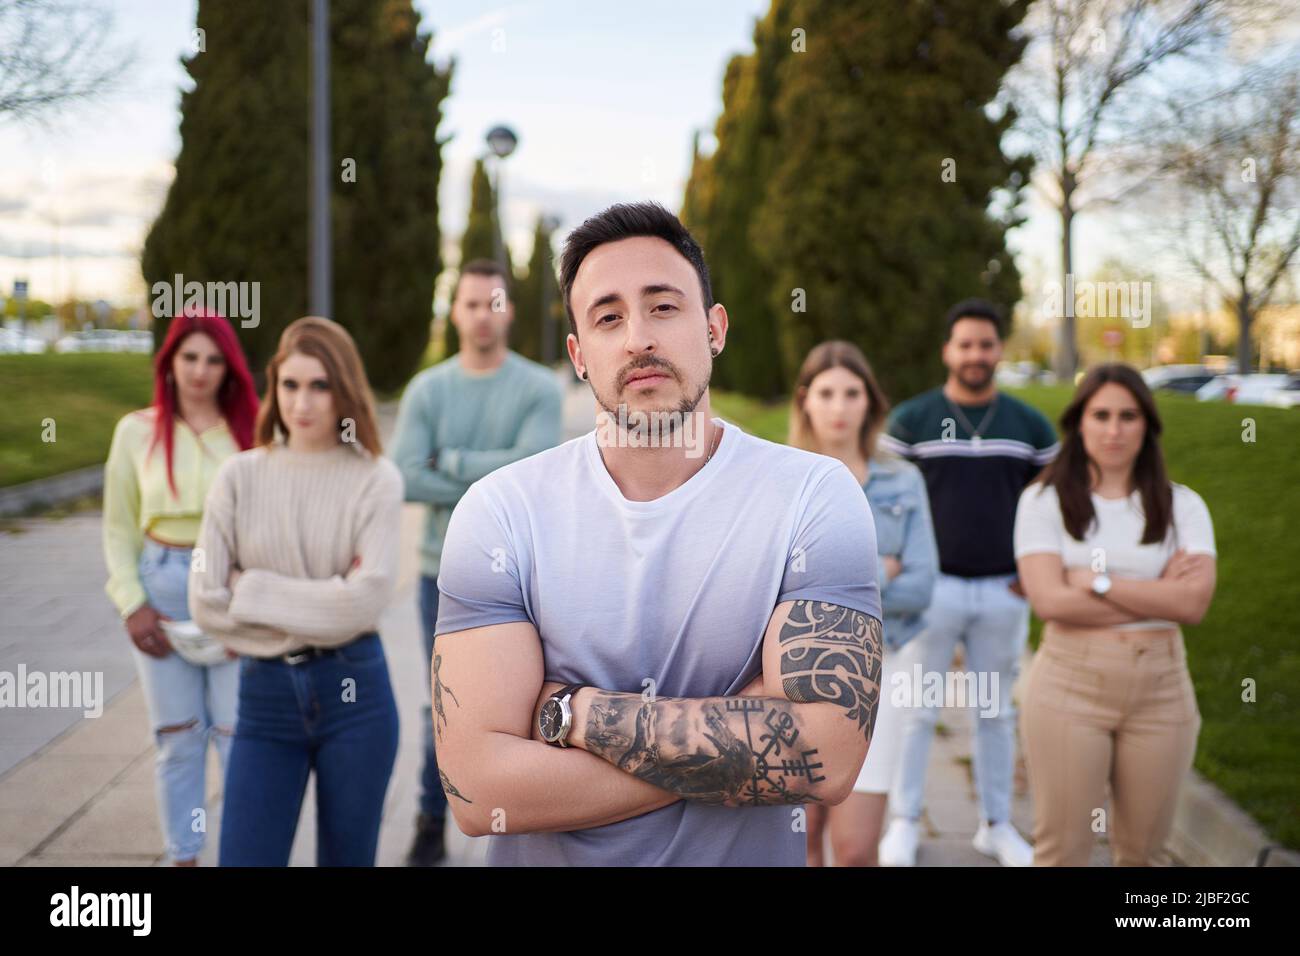 Man looking serious at the camera while standing in front of a group of people. Team and leadership concept. Stock Photo